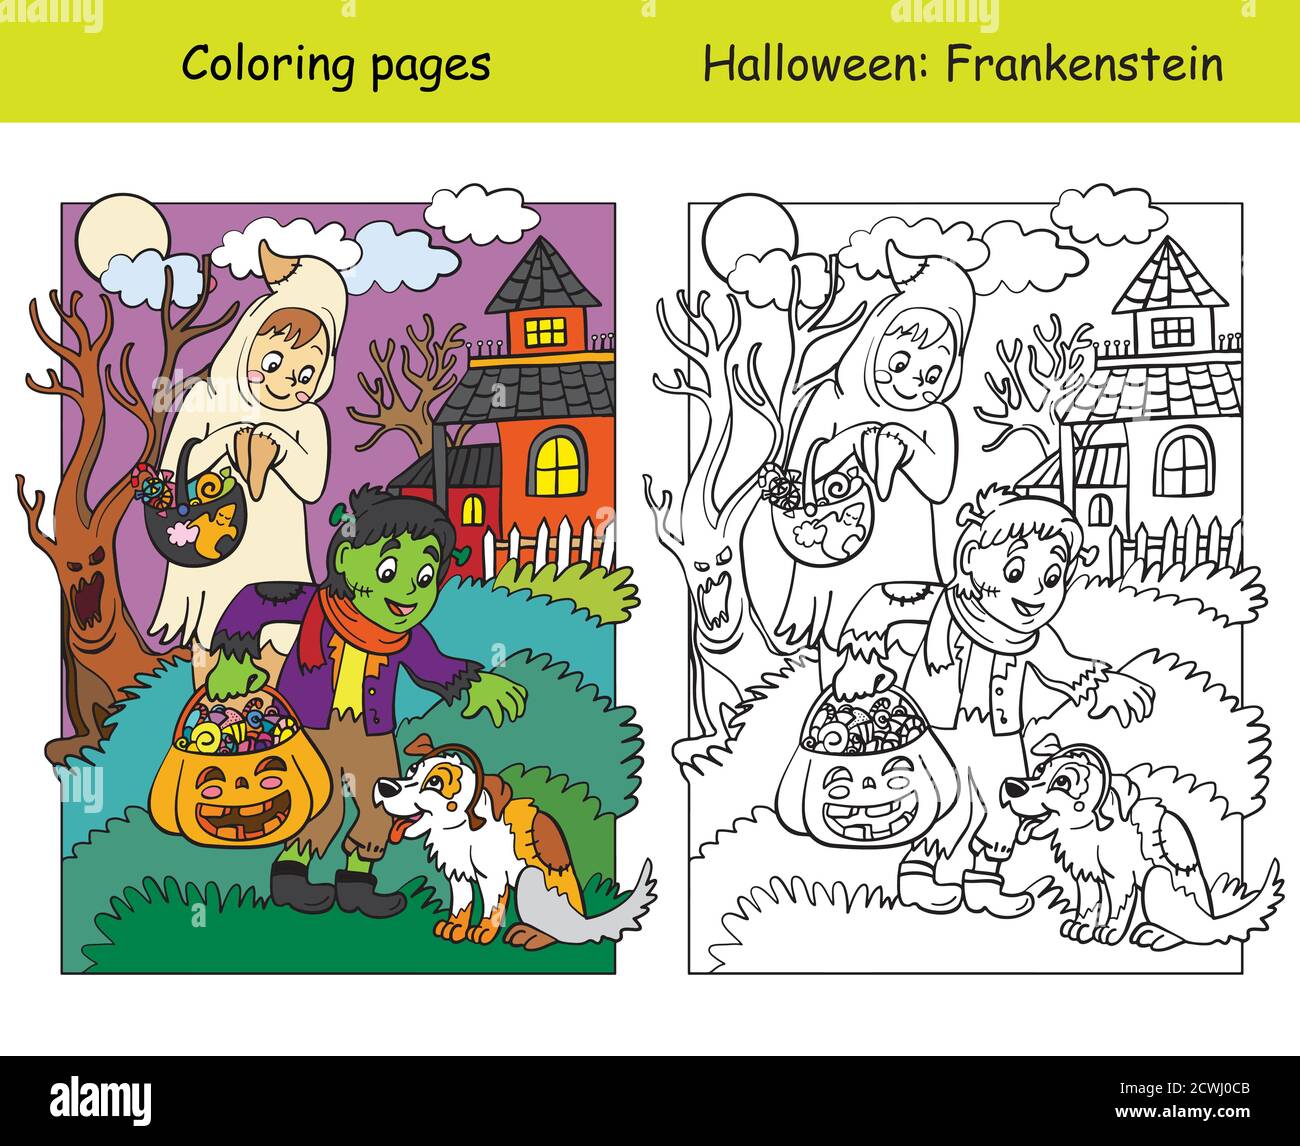 Coloring with colored example Halloween characters and dog Stock ...